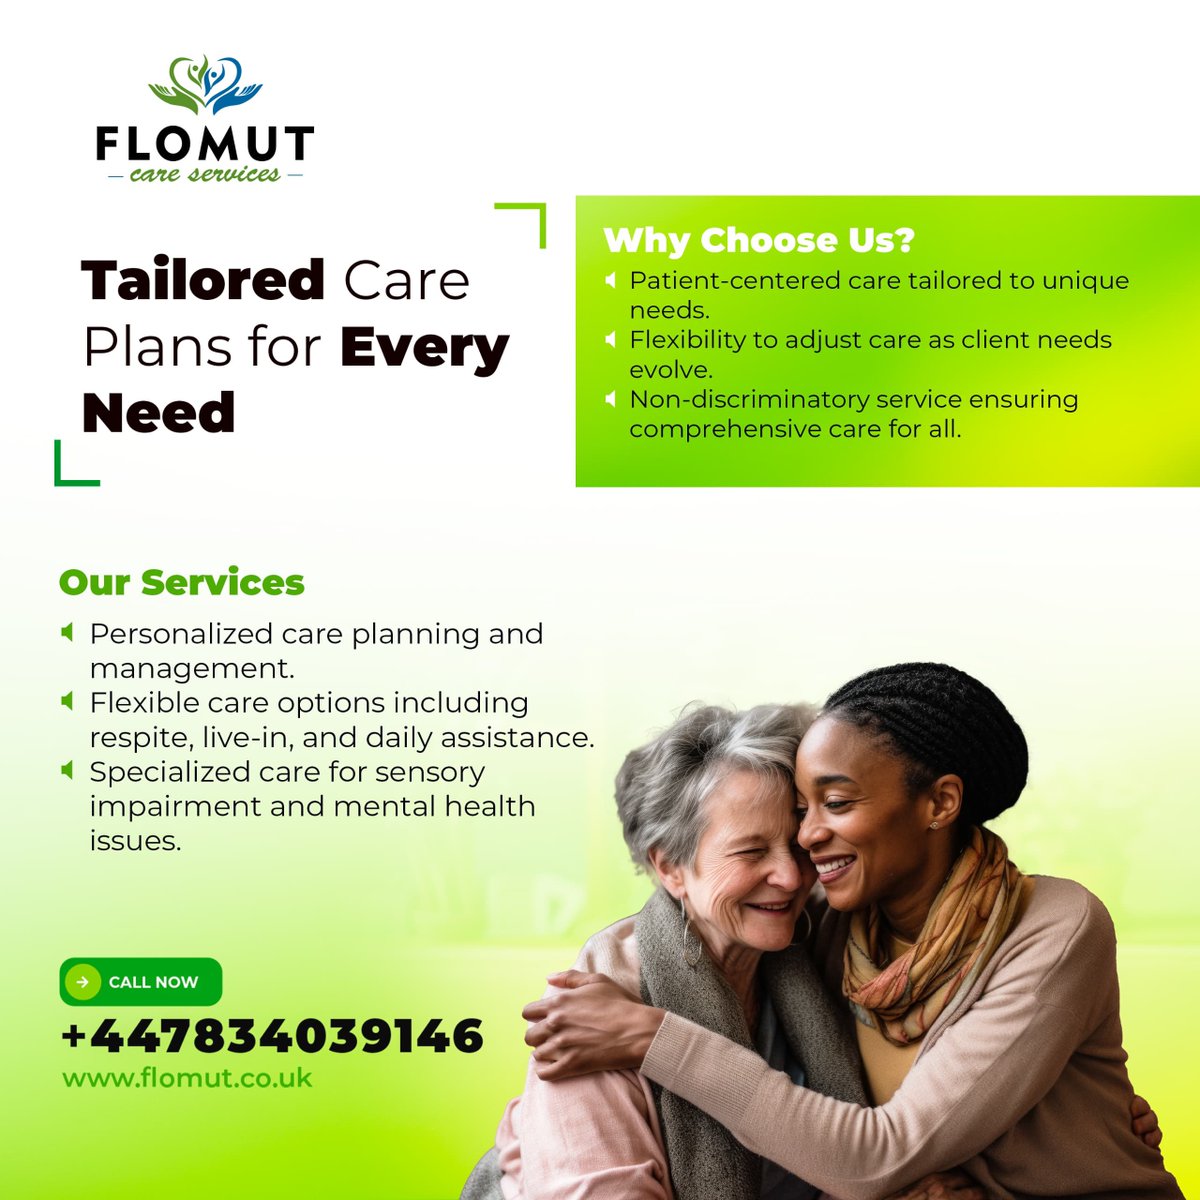 Start and finish your day enveloped in care that resembles family. Our personalized services integrate smoothly into your daily life, all backed by Care Quality Commission approval. Each of your needs is addressed with a warm smile.